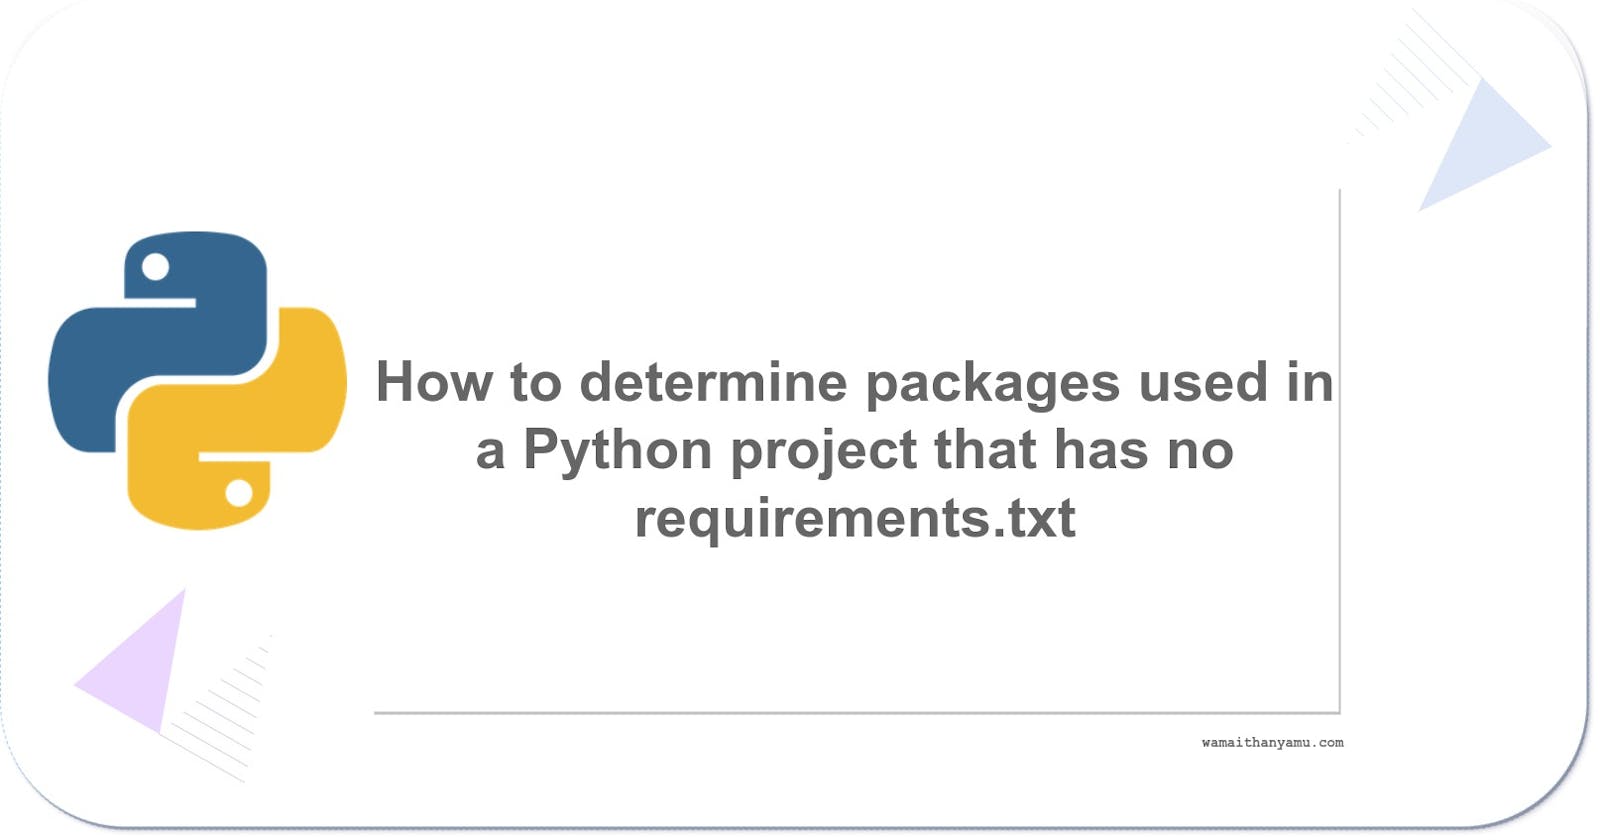 How to determine packages used in a Python project that has no requirements.txt